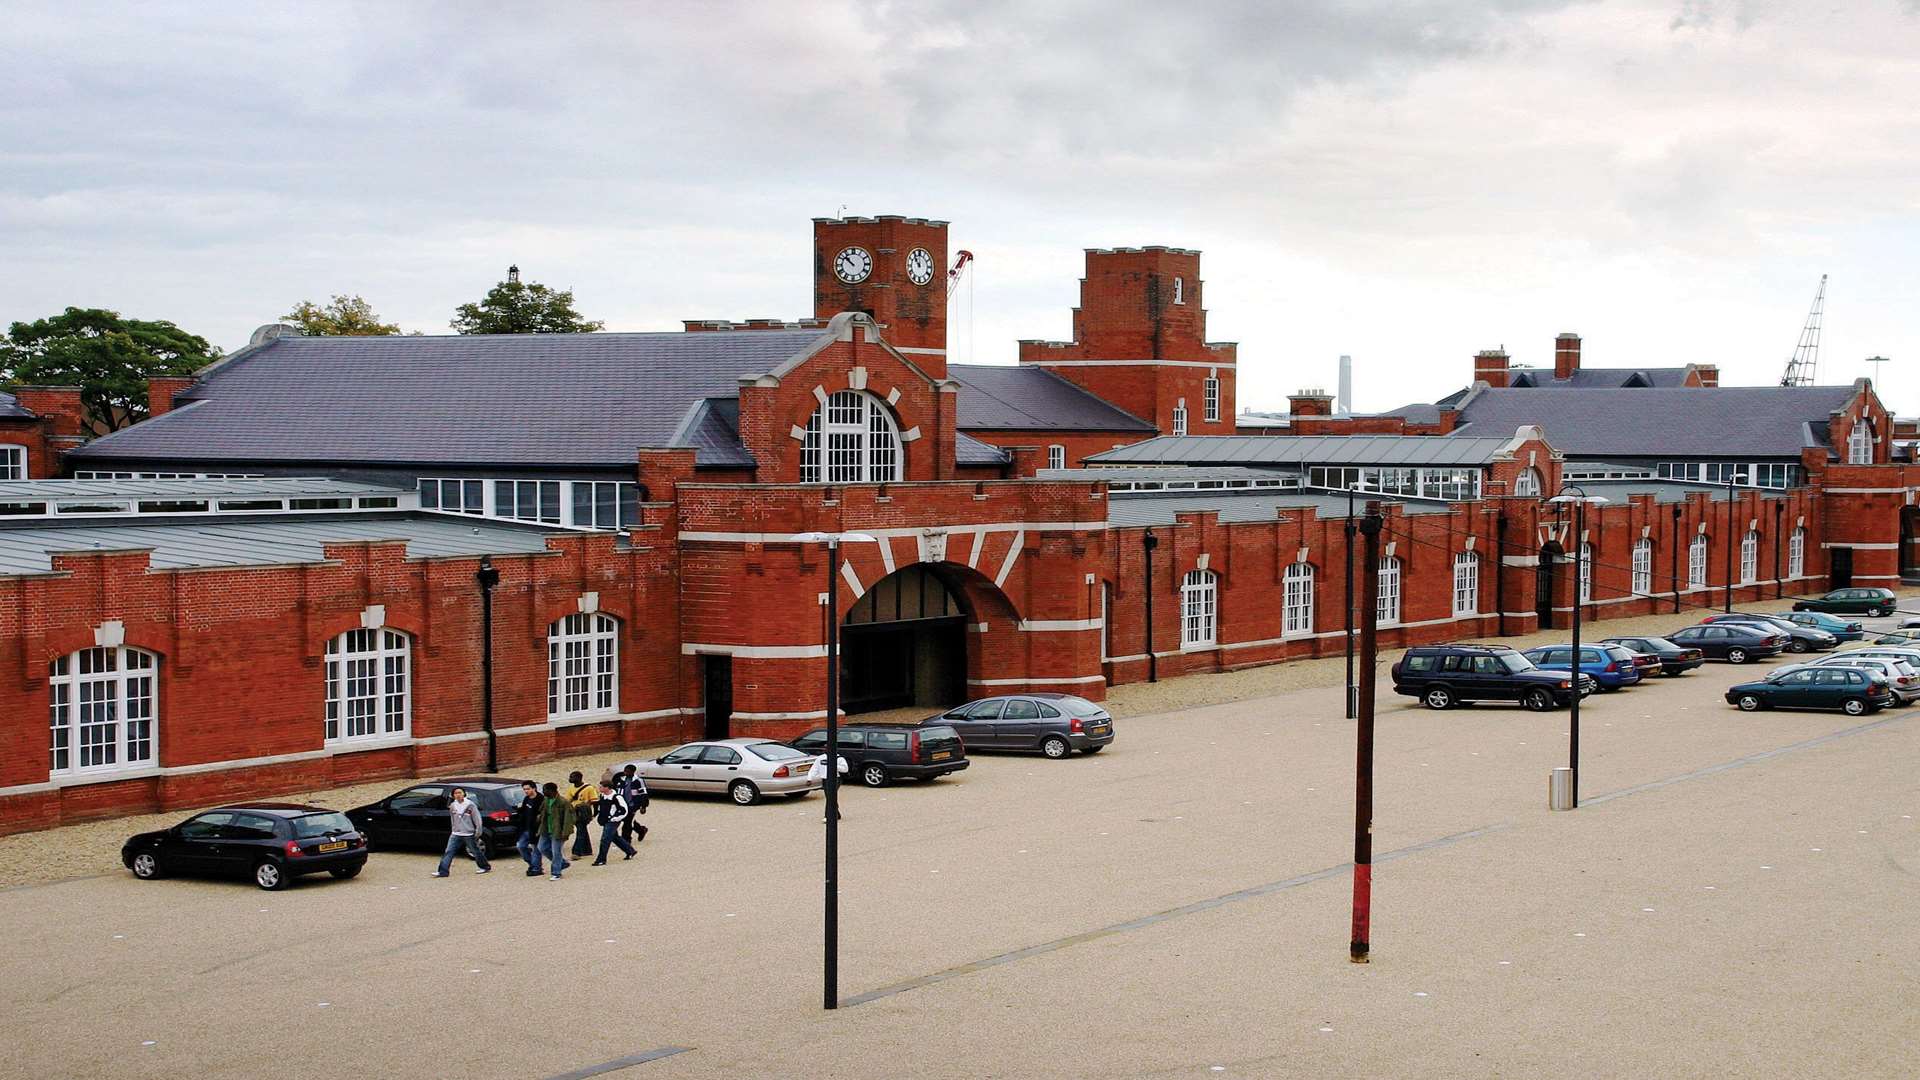 The Drill Hall library at the University of Kent campus.